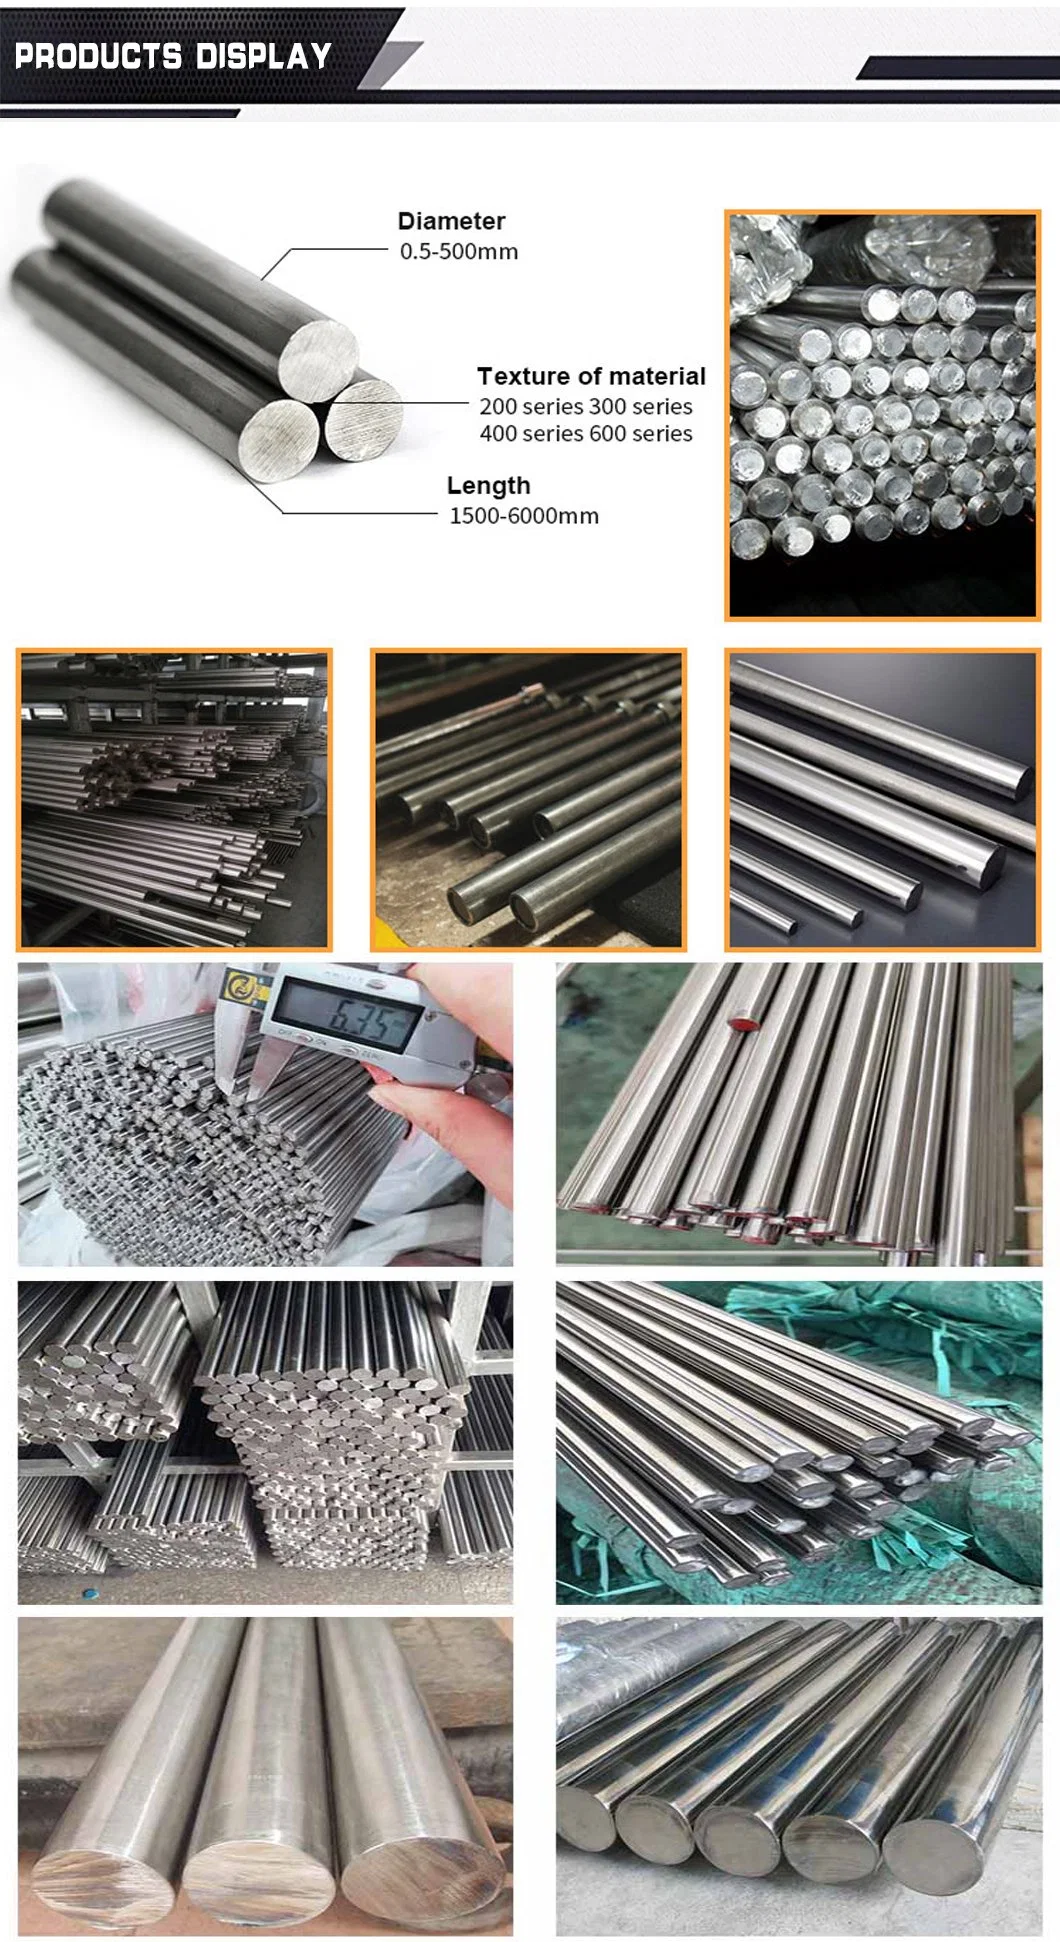 Stainless Steel Flat Bar 4mm AISI 316 Stainless Steel Round Bar